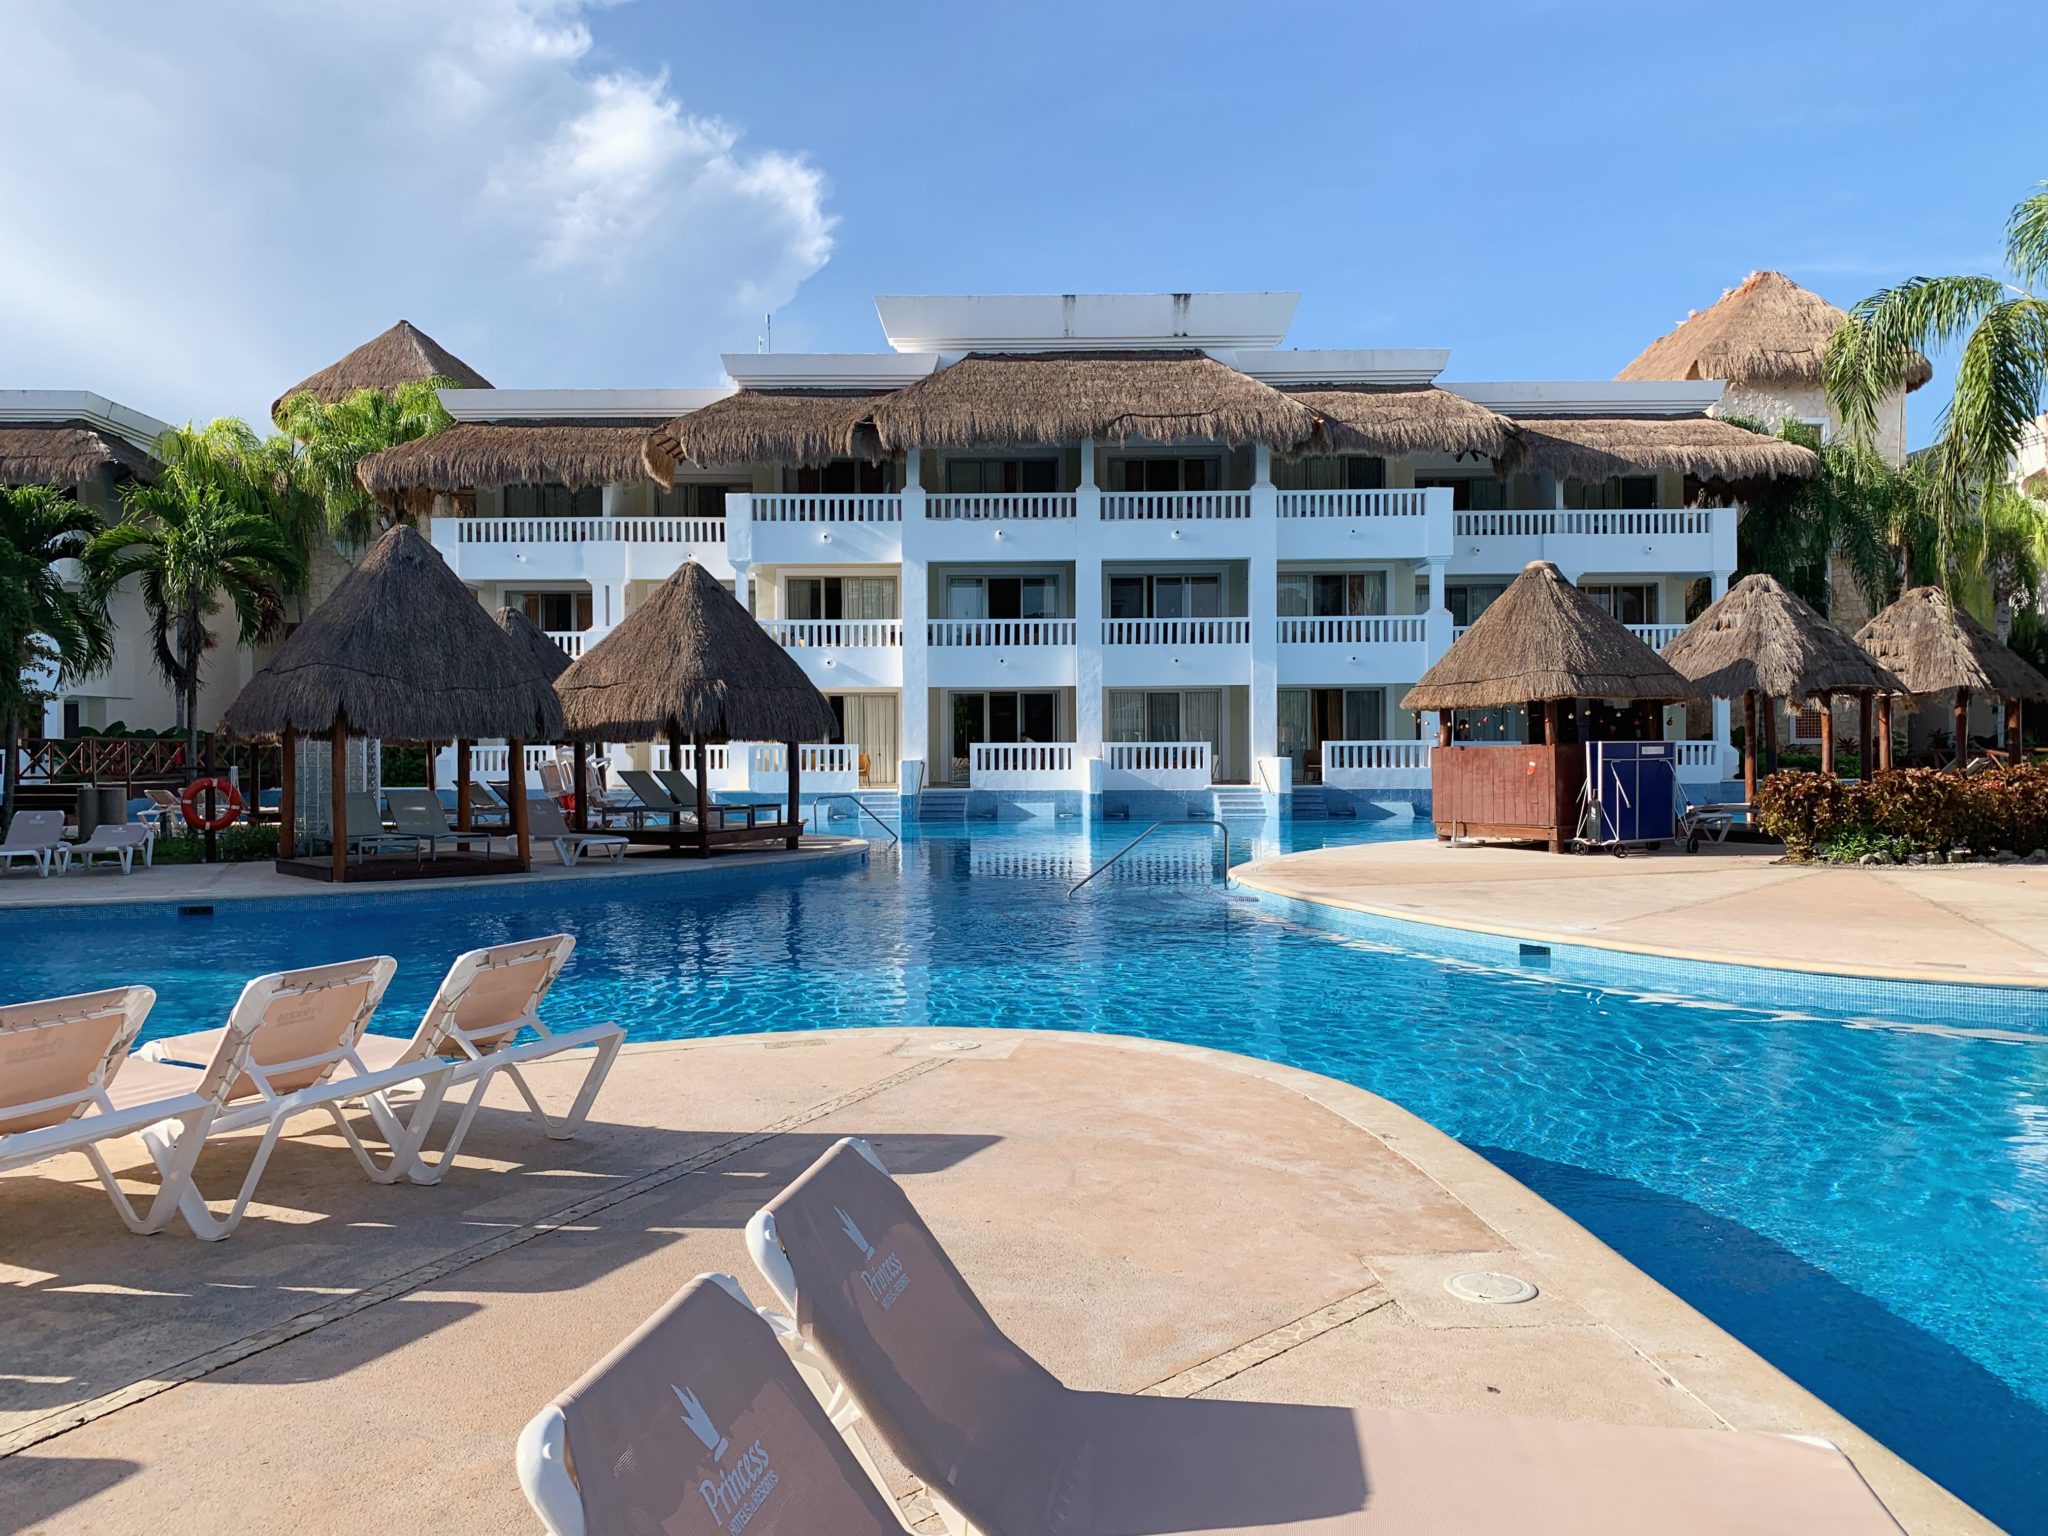 Grand Sunset Princess Resort Review in Mexico